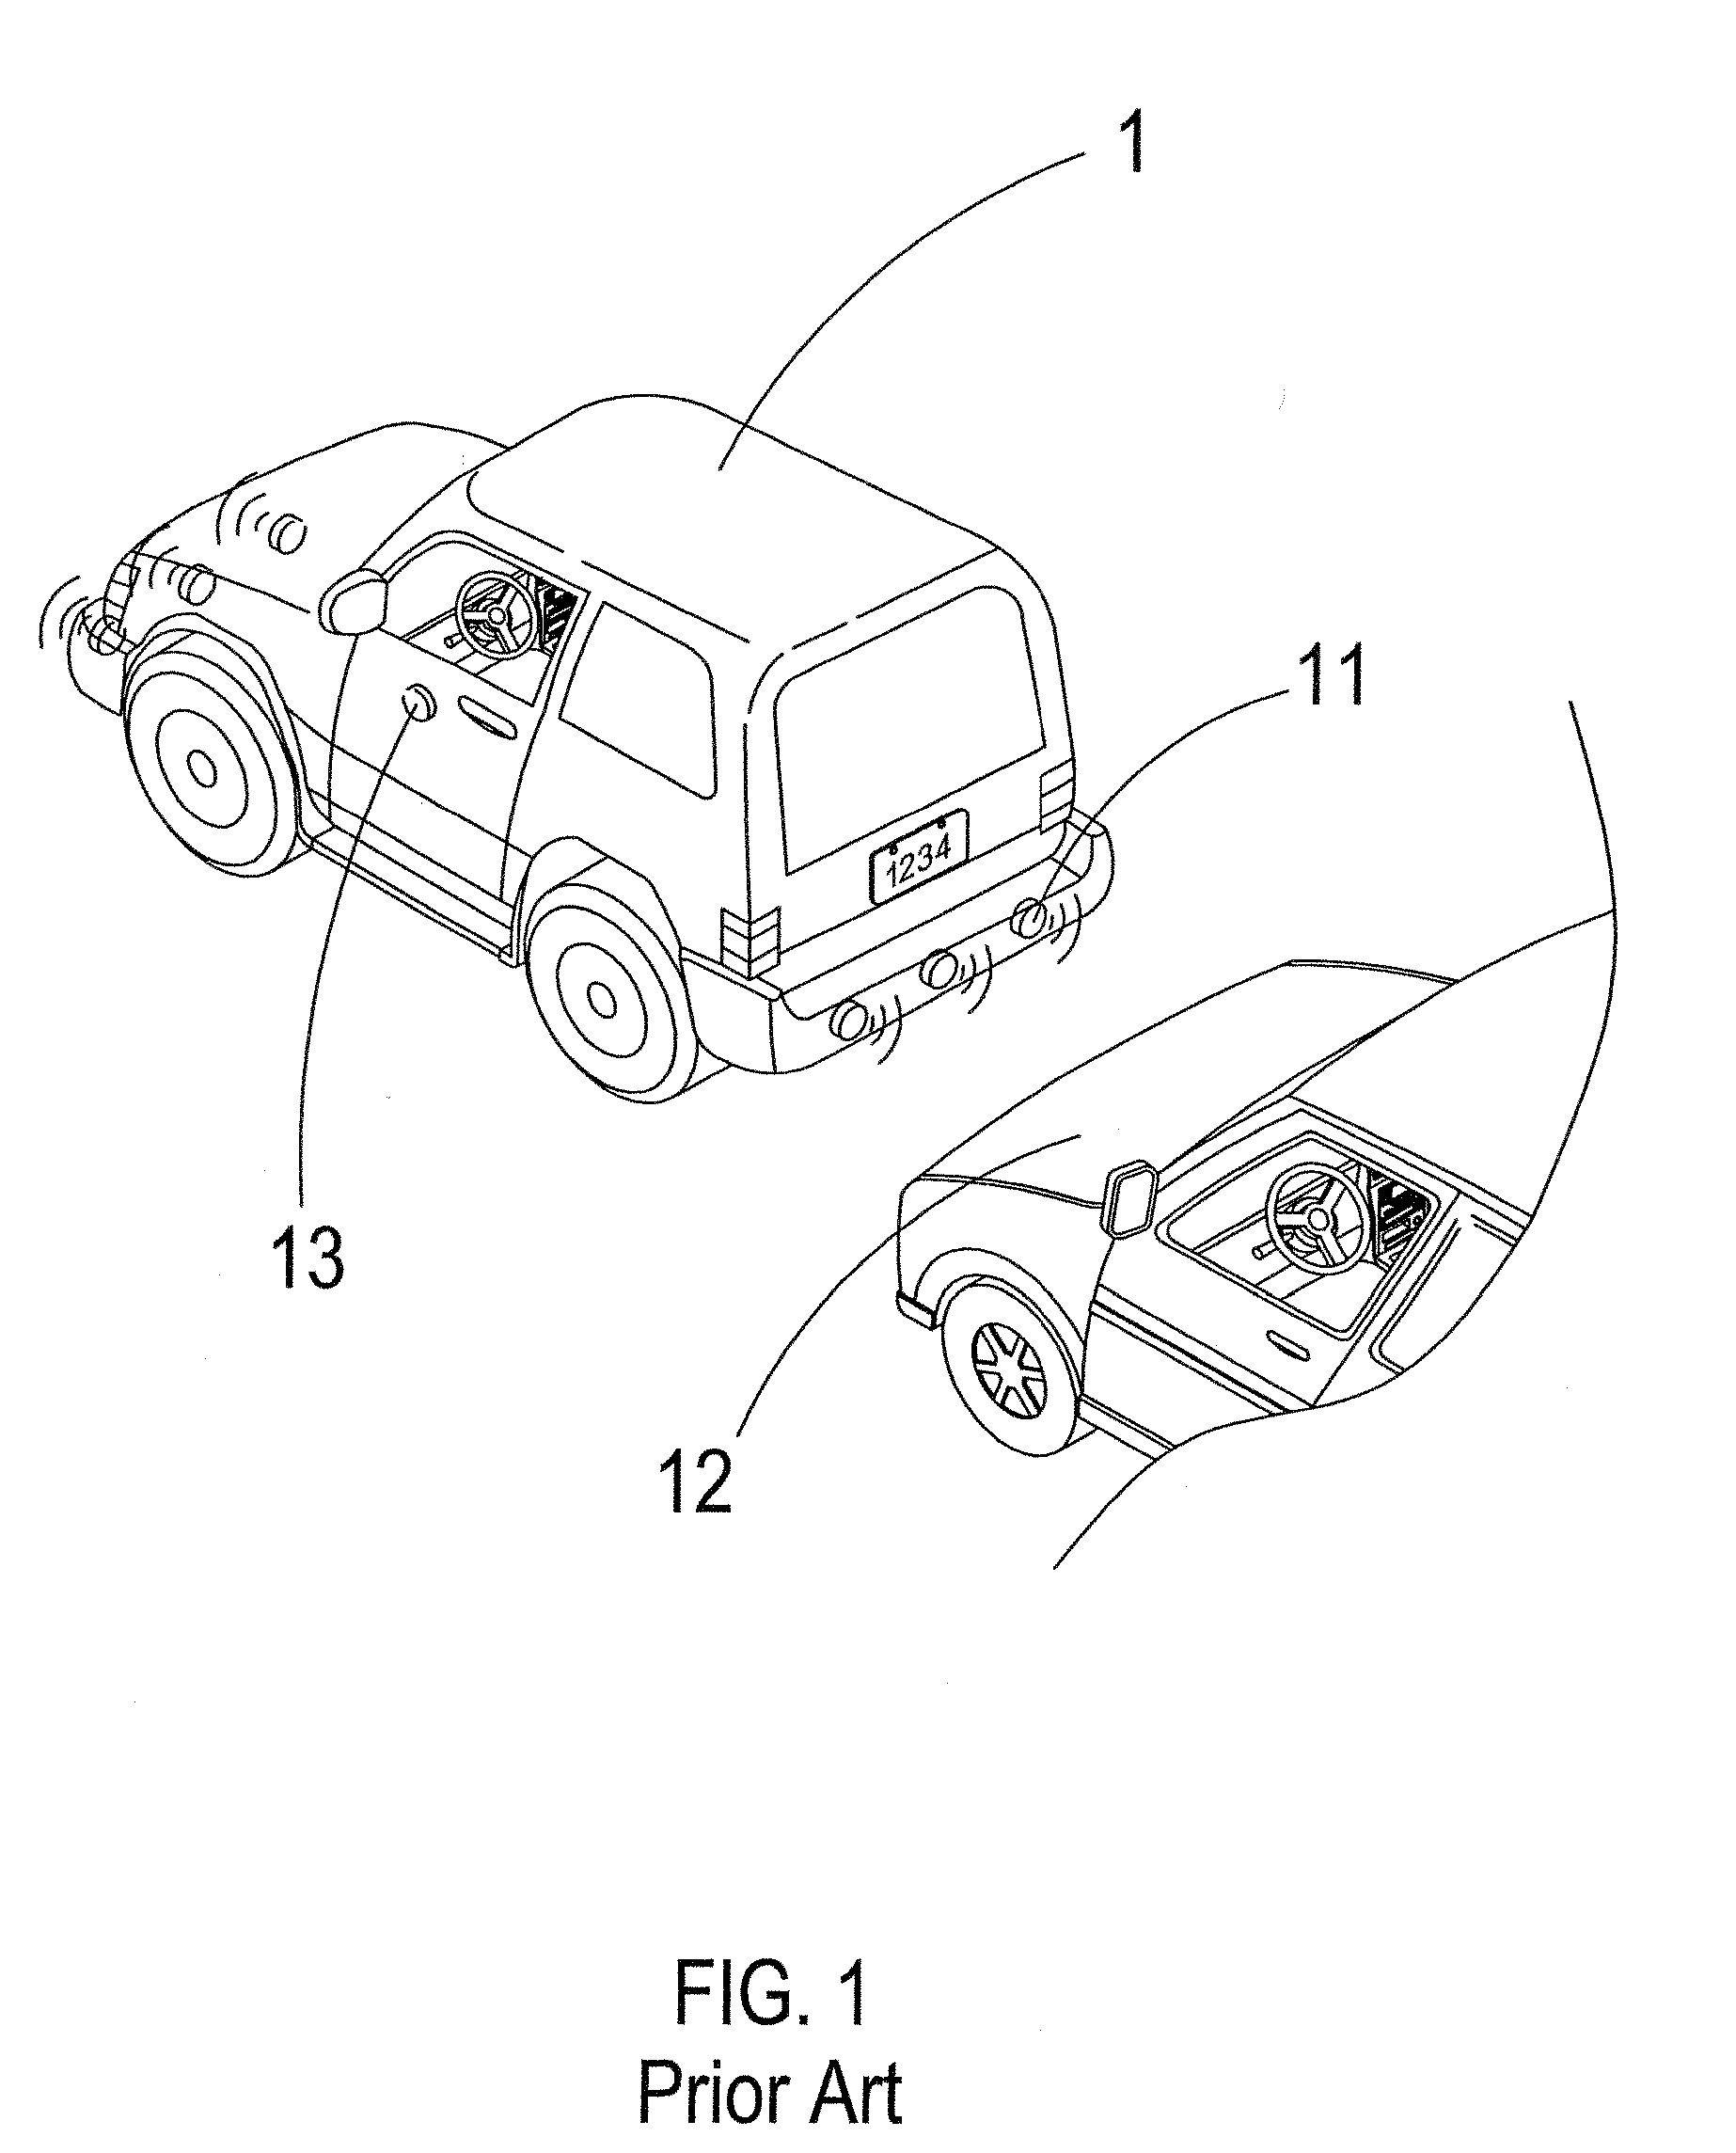 Automobile Anti-Collision Early-Warning Device